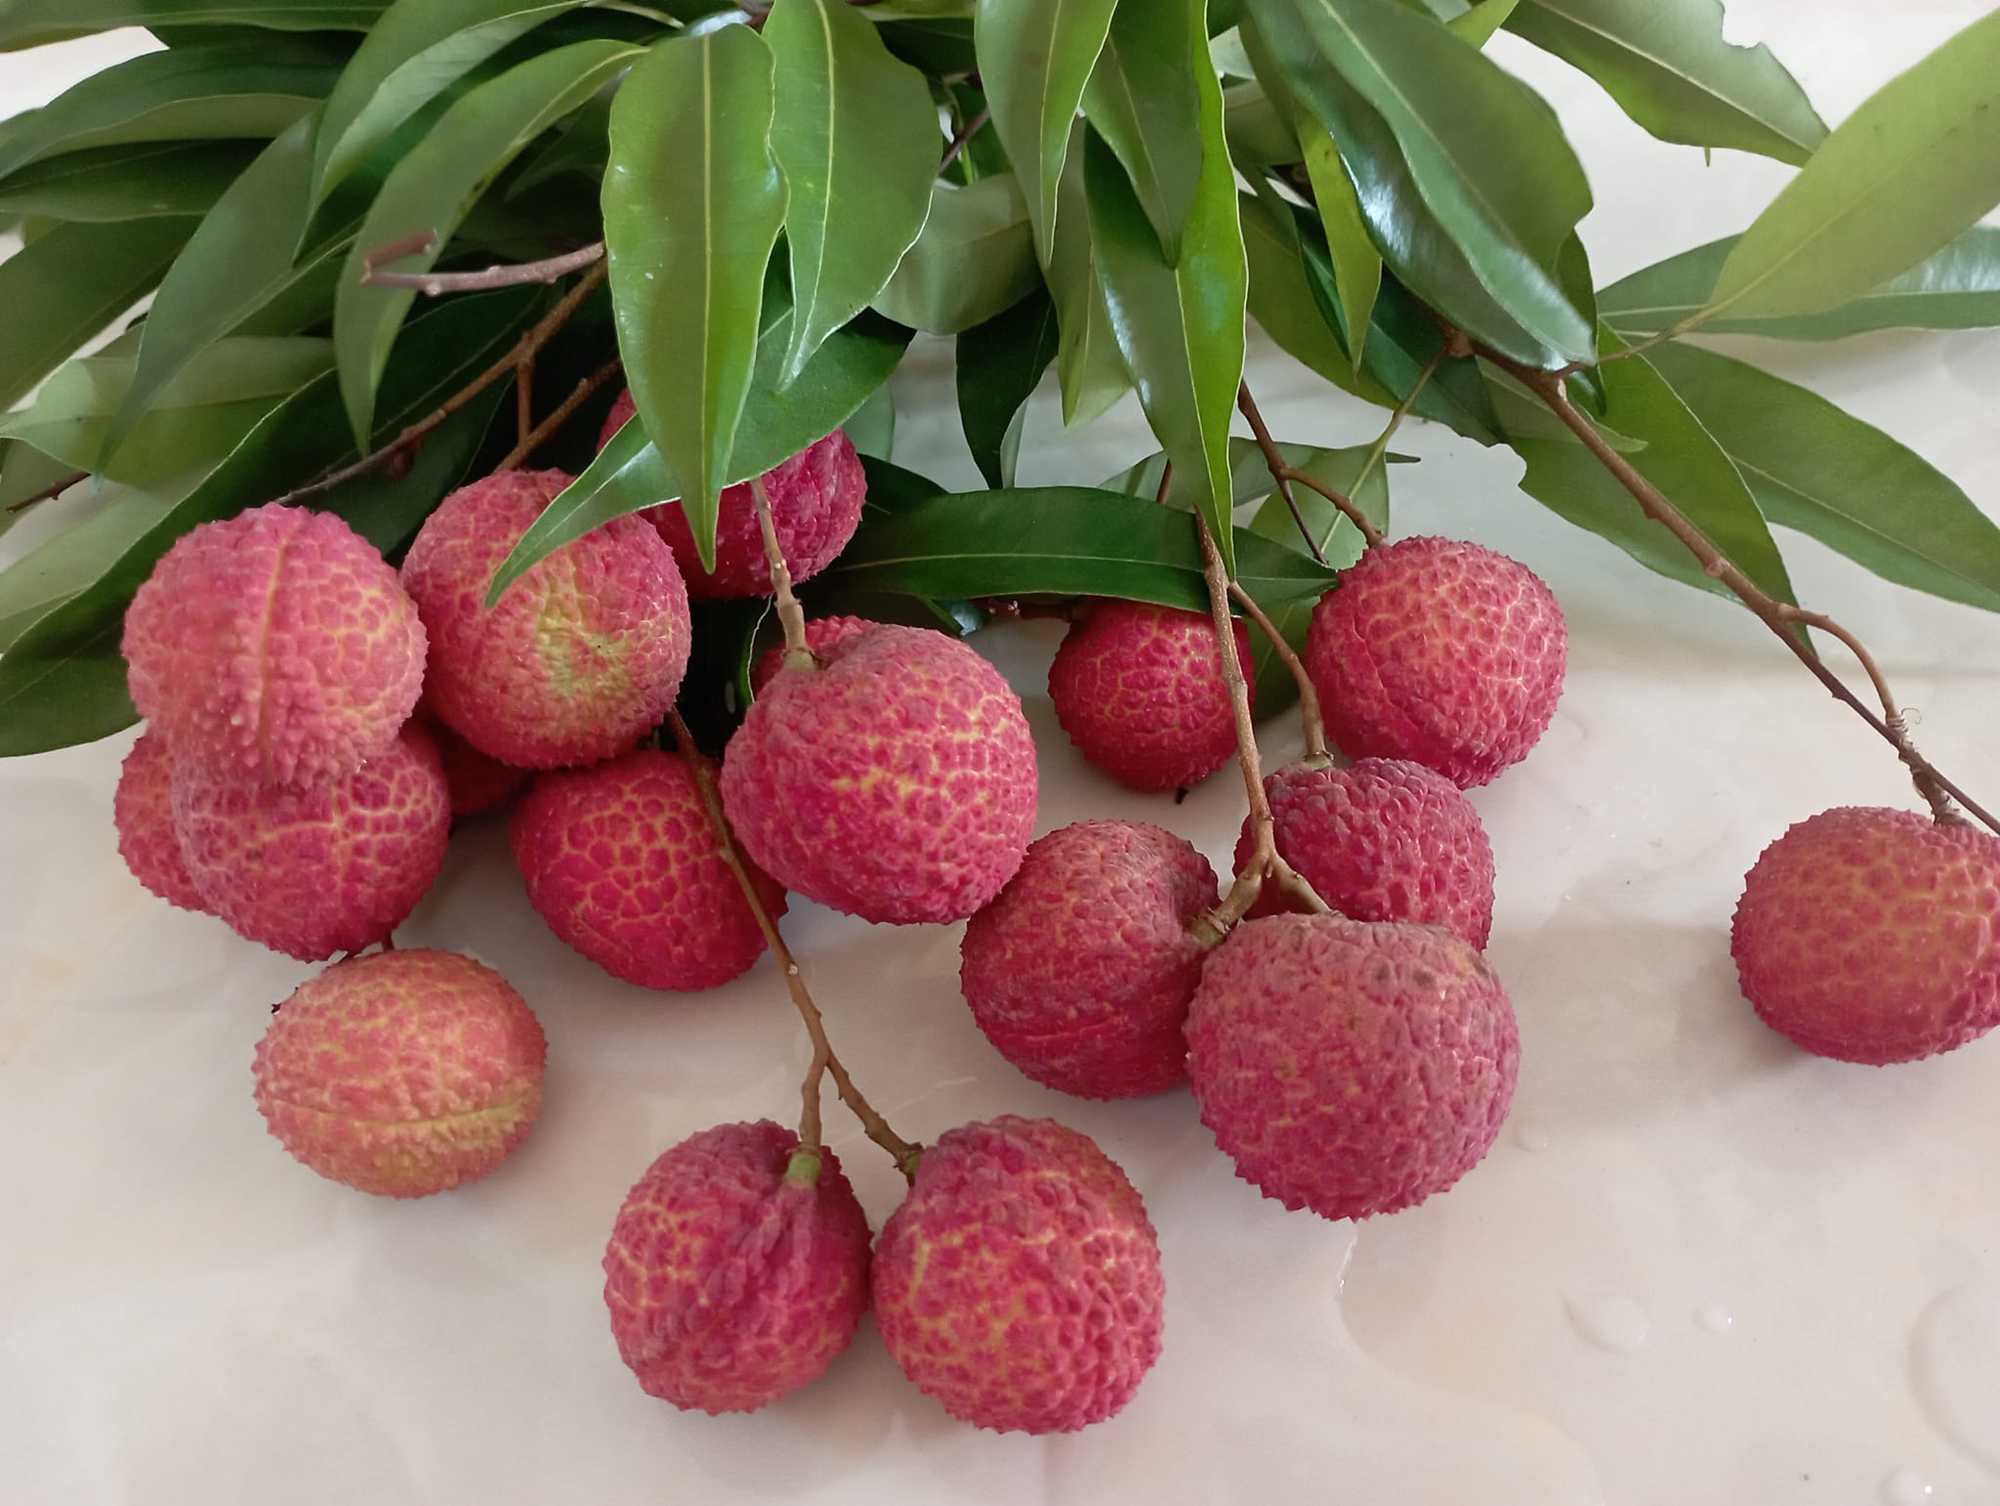 Bac Giang successfully planted a new type of lychee: No seeds, different sweet and crispy - Photo 3.